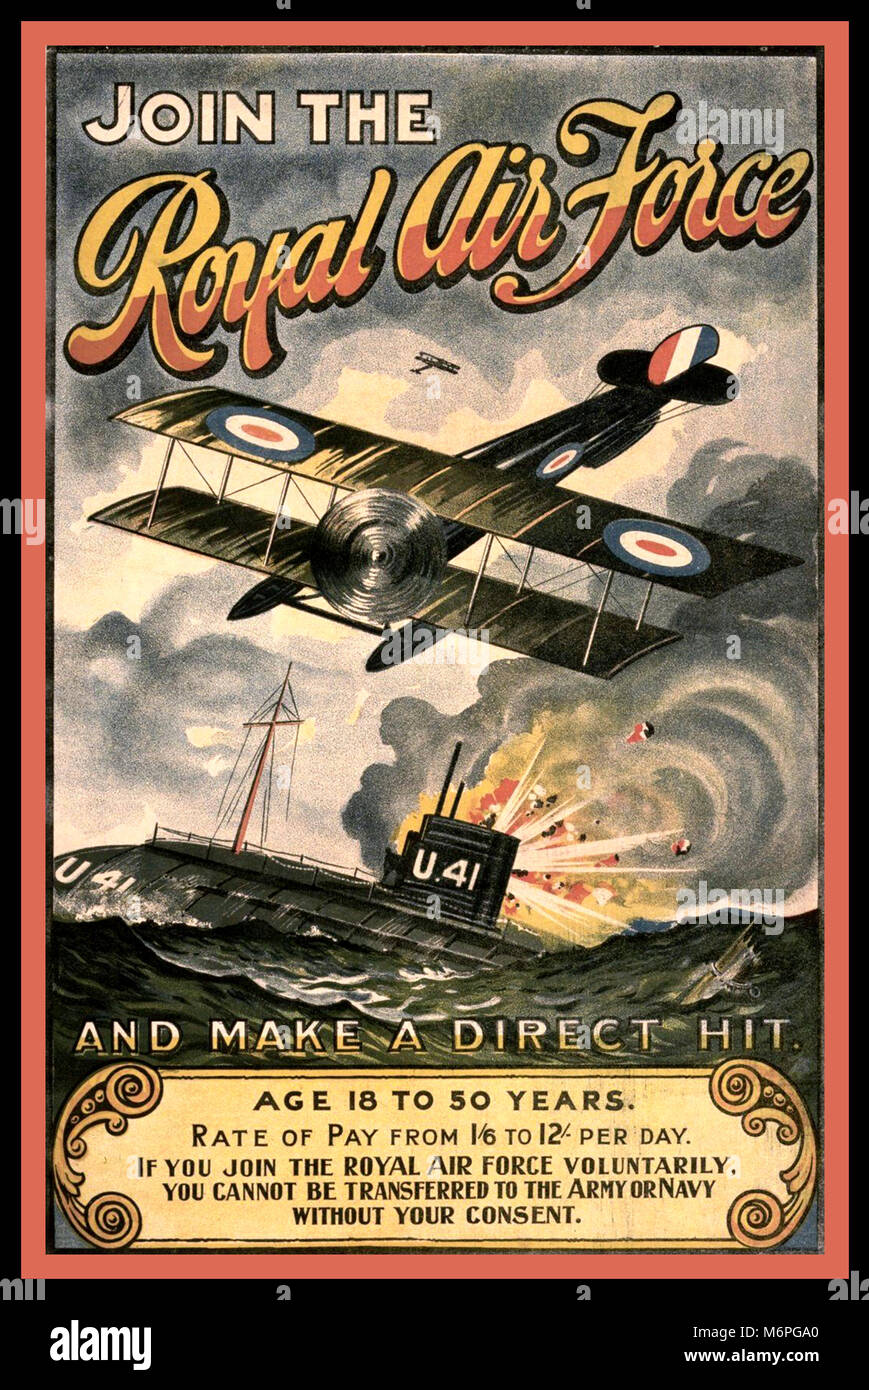 WWI RECRUITMENT RAF VINTAGE UK POSTER British Royal Air Force Poster used for recruiting issued by the Royal Air Force during World War I, 1914-18. It was produced to ask men from 18-50 years of age to join the Royal Air Force and make direct hit. Illustrated is a ‘direct hit’ on a German U-Boat U41 Stock Photo